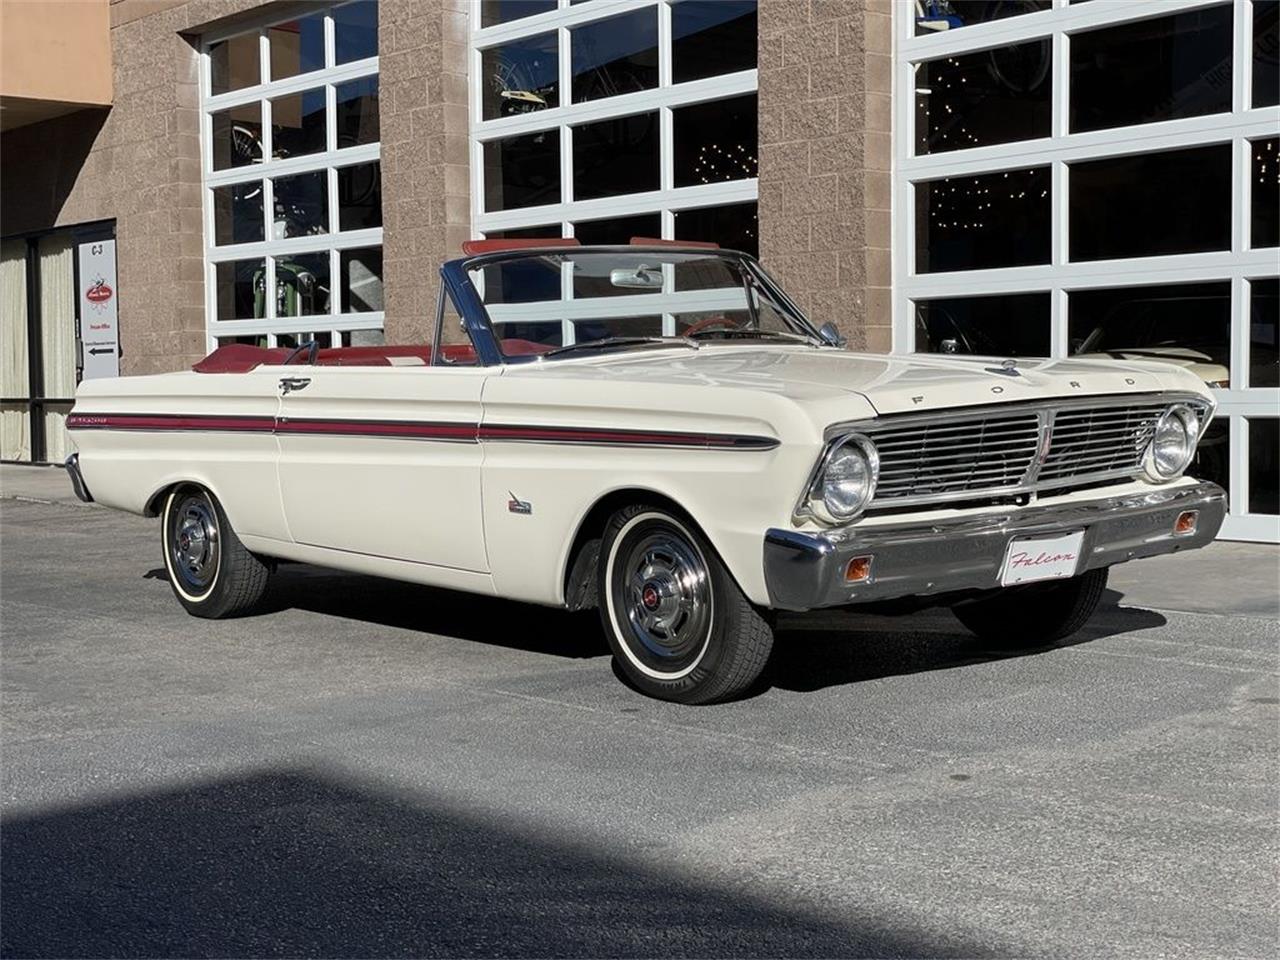 For Sale: 1965 Ford Falcon in Henderson, Nevada for sale in Henderson, NV